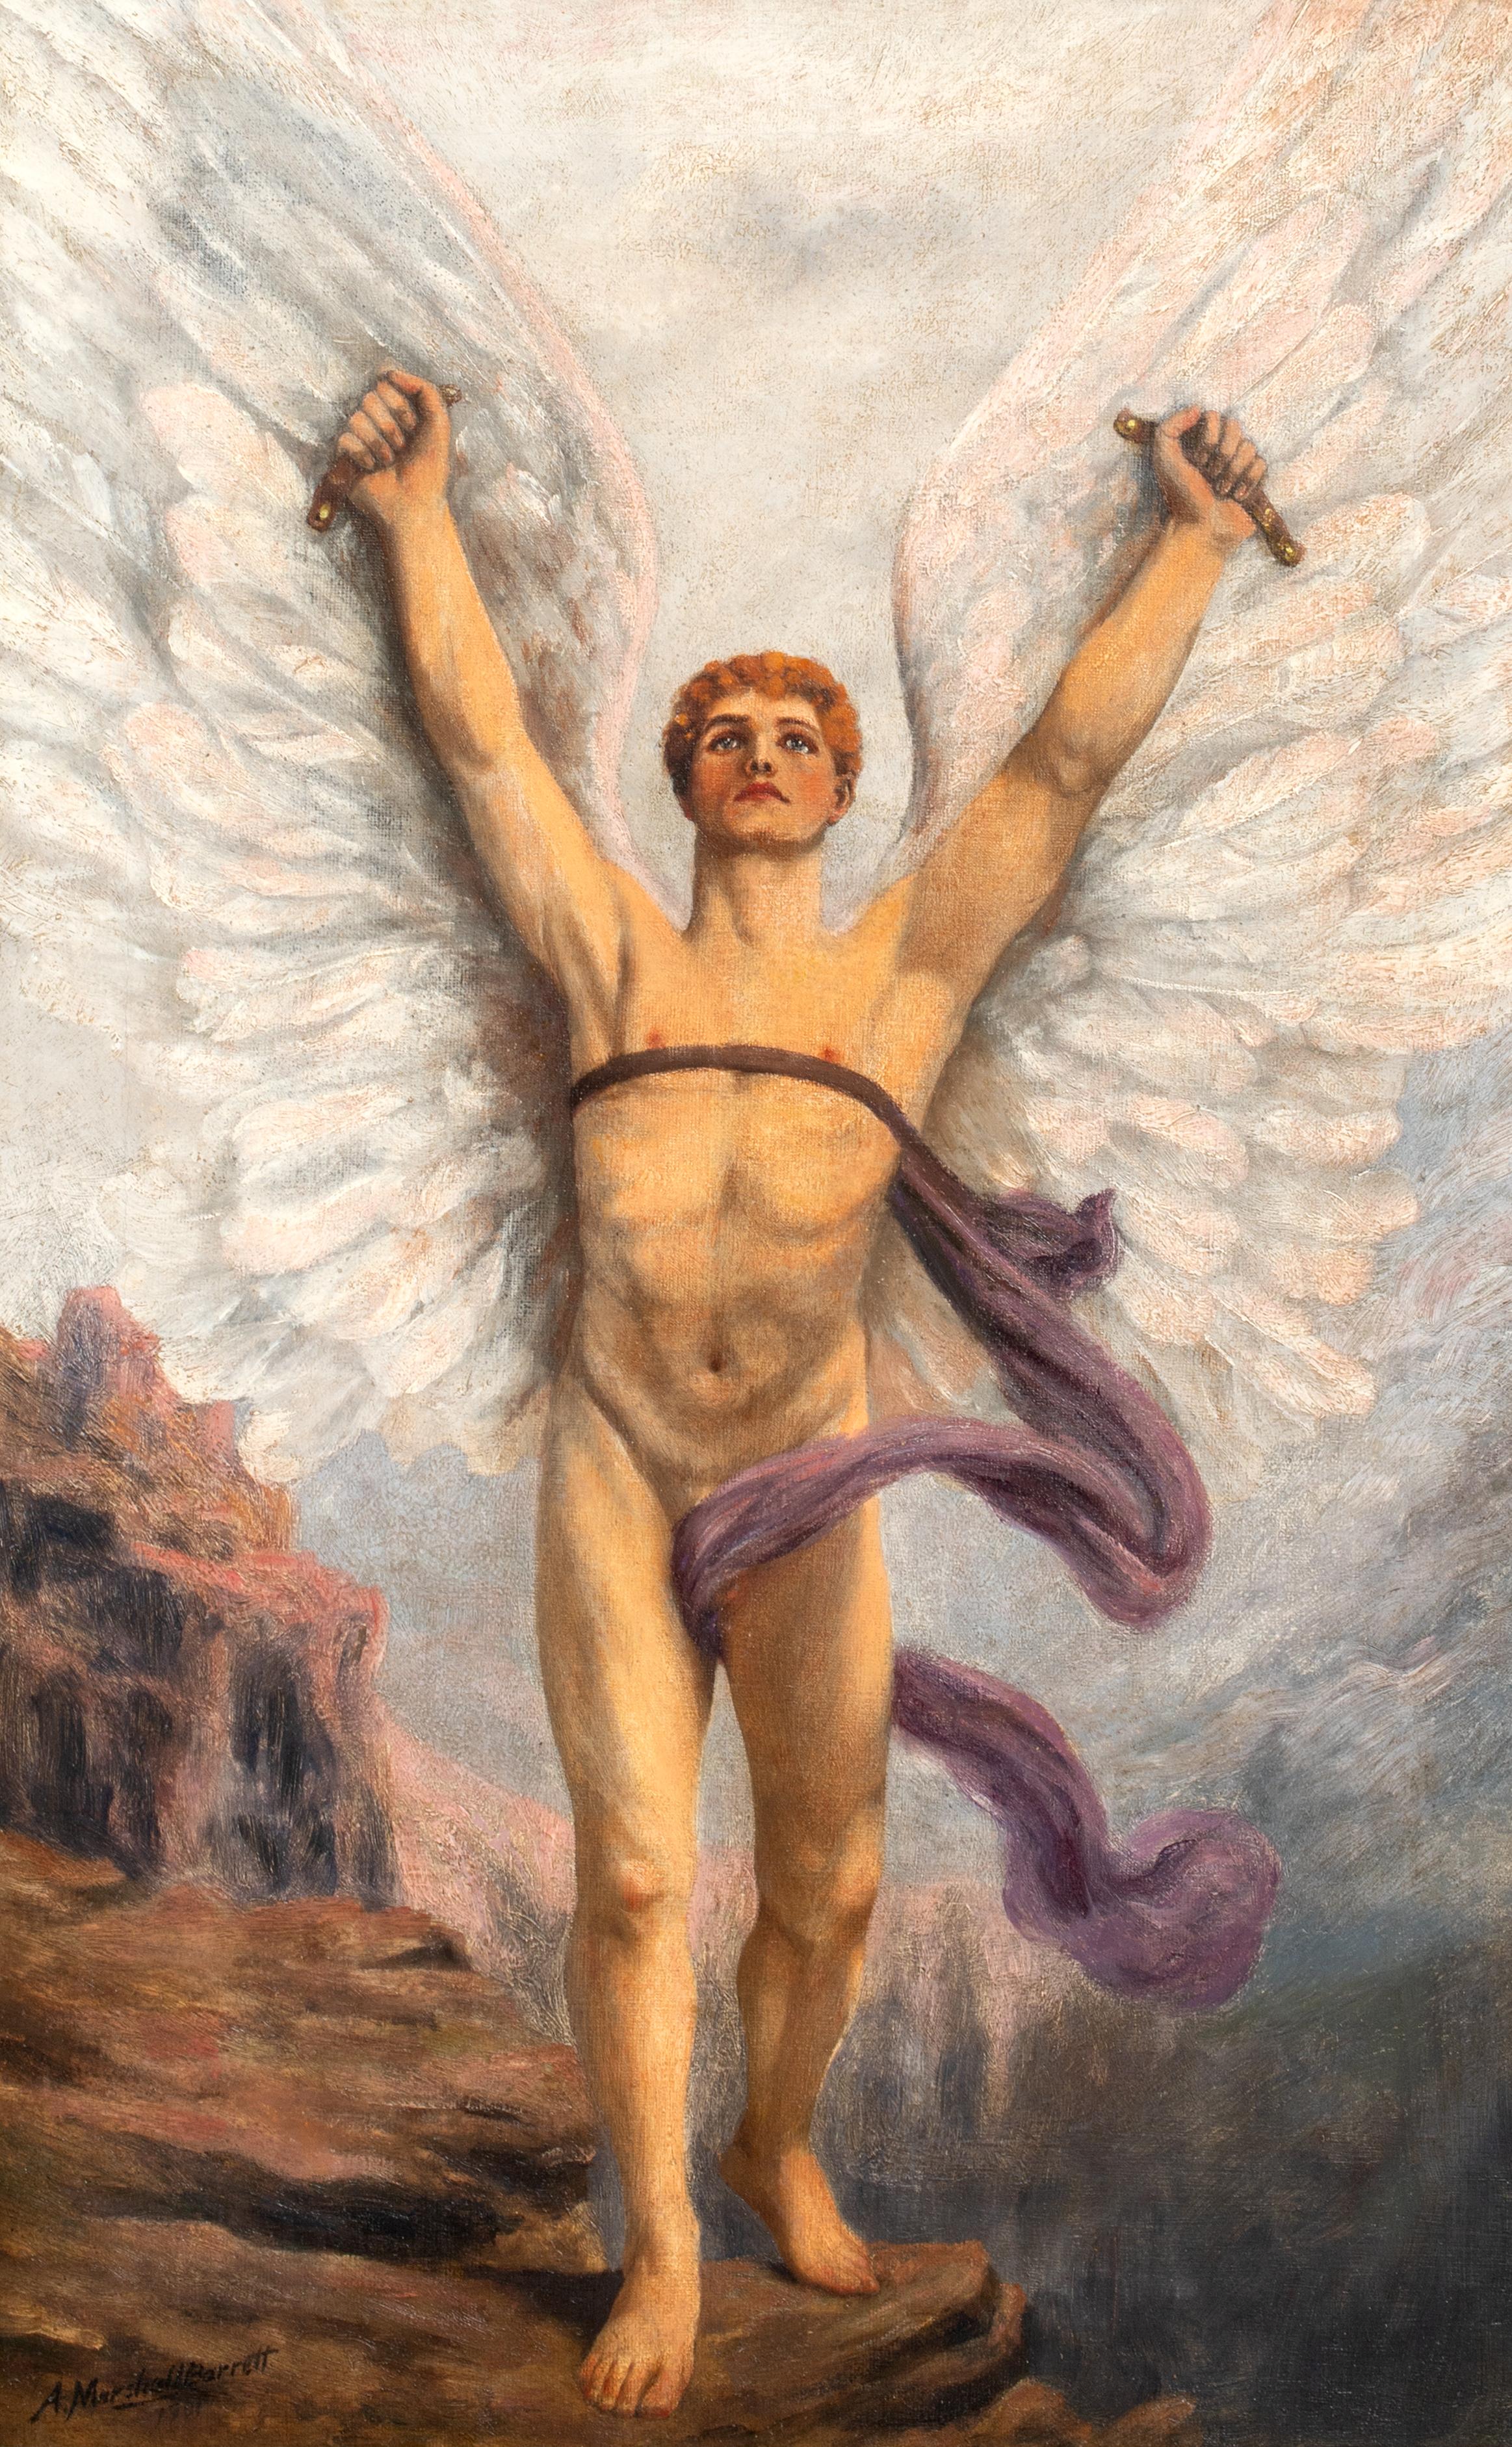 Icarus, 19th Century 

follower of William Blake (1757-1827)

19th Century English Romantic School / Pre Raphaelite depiction of Icarus, oil on canvas. Full length scene of Icarus with his wings opened heavenward for flight symbolic of the pride